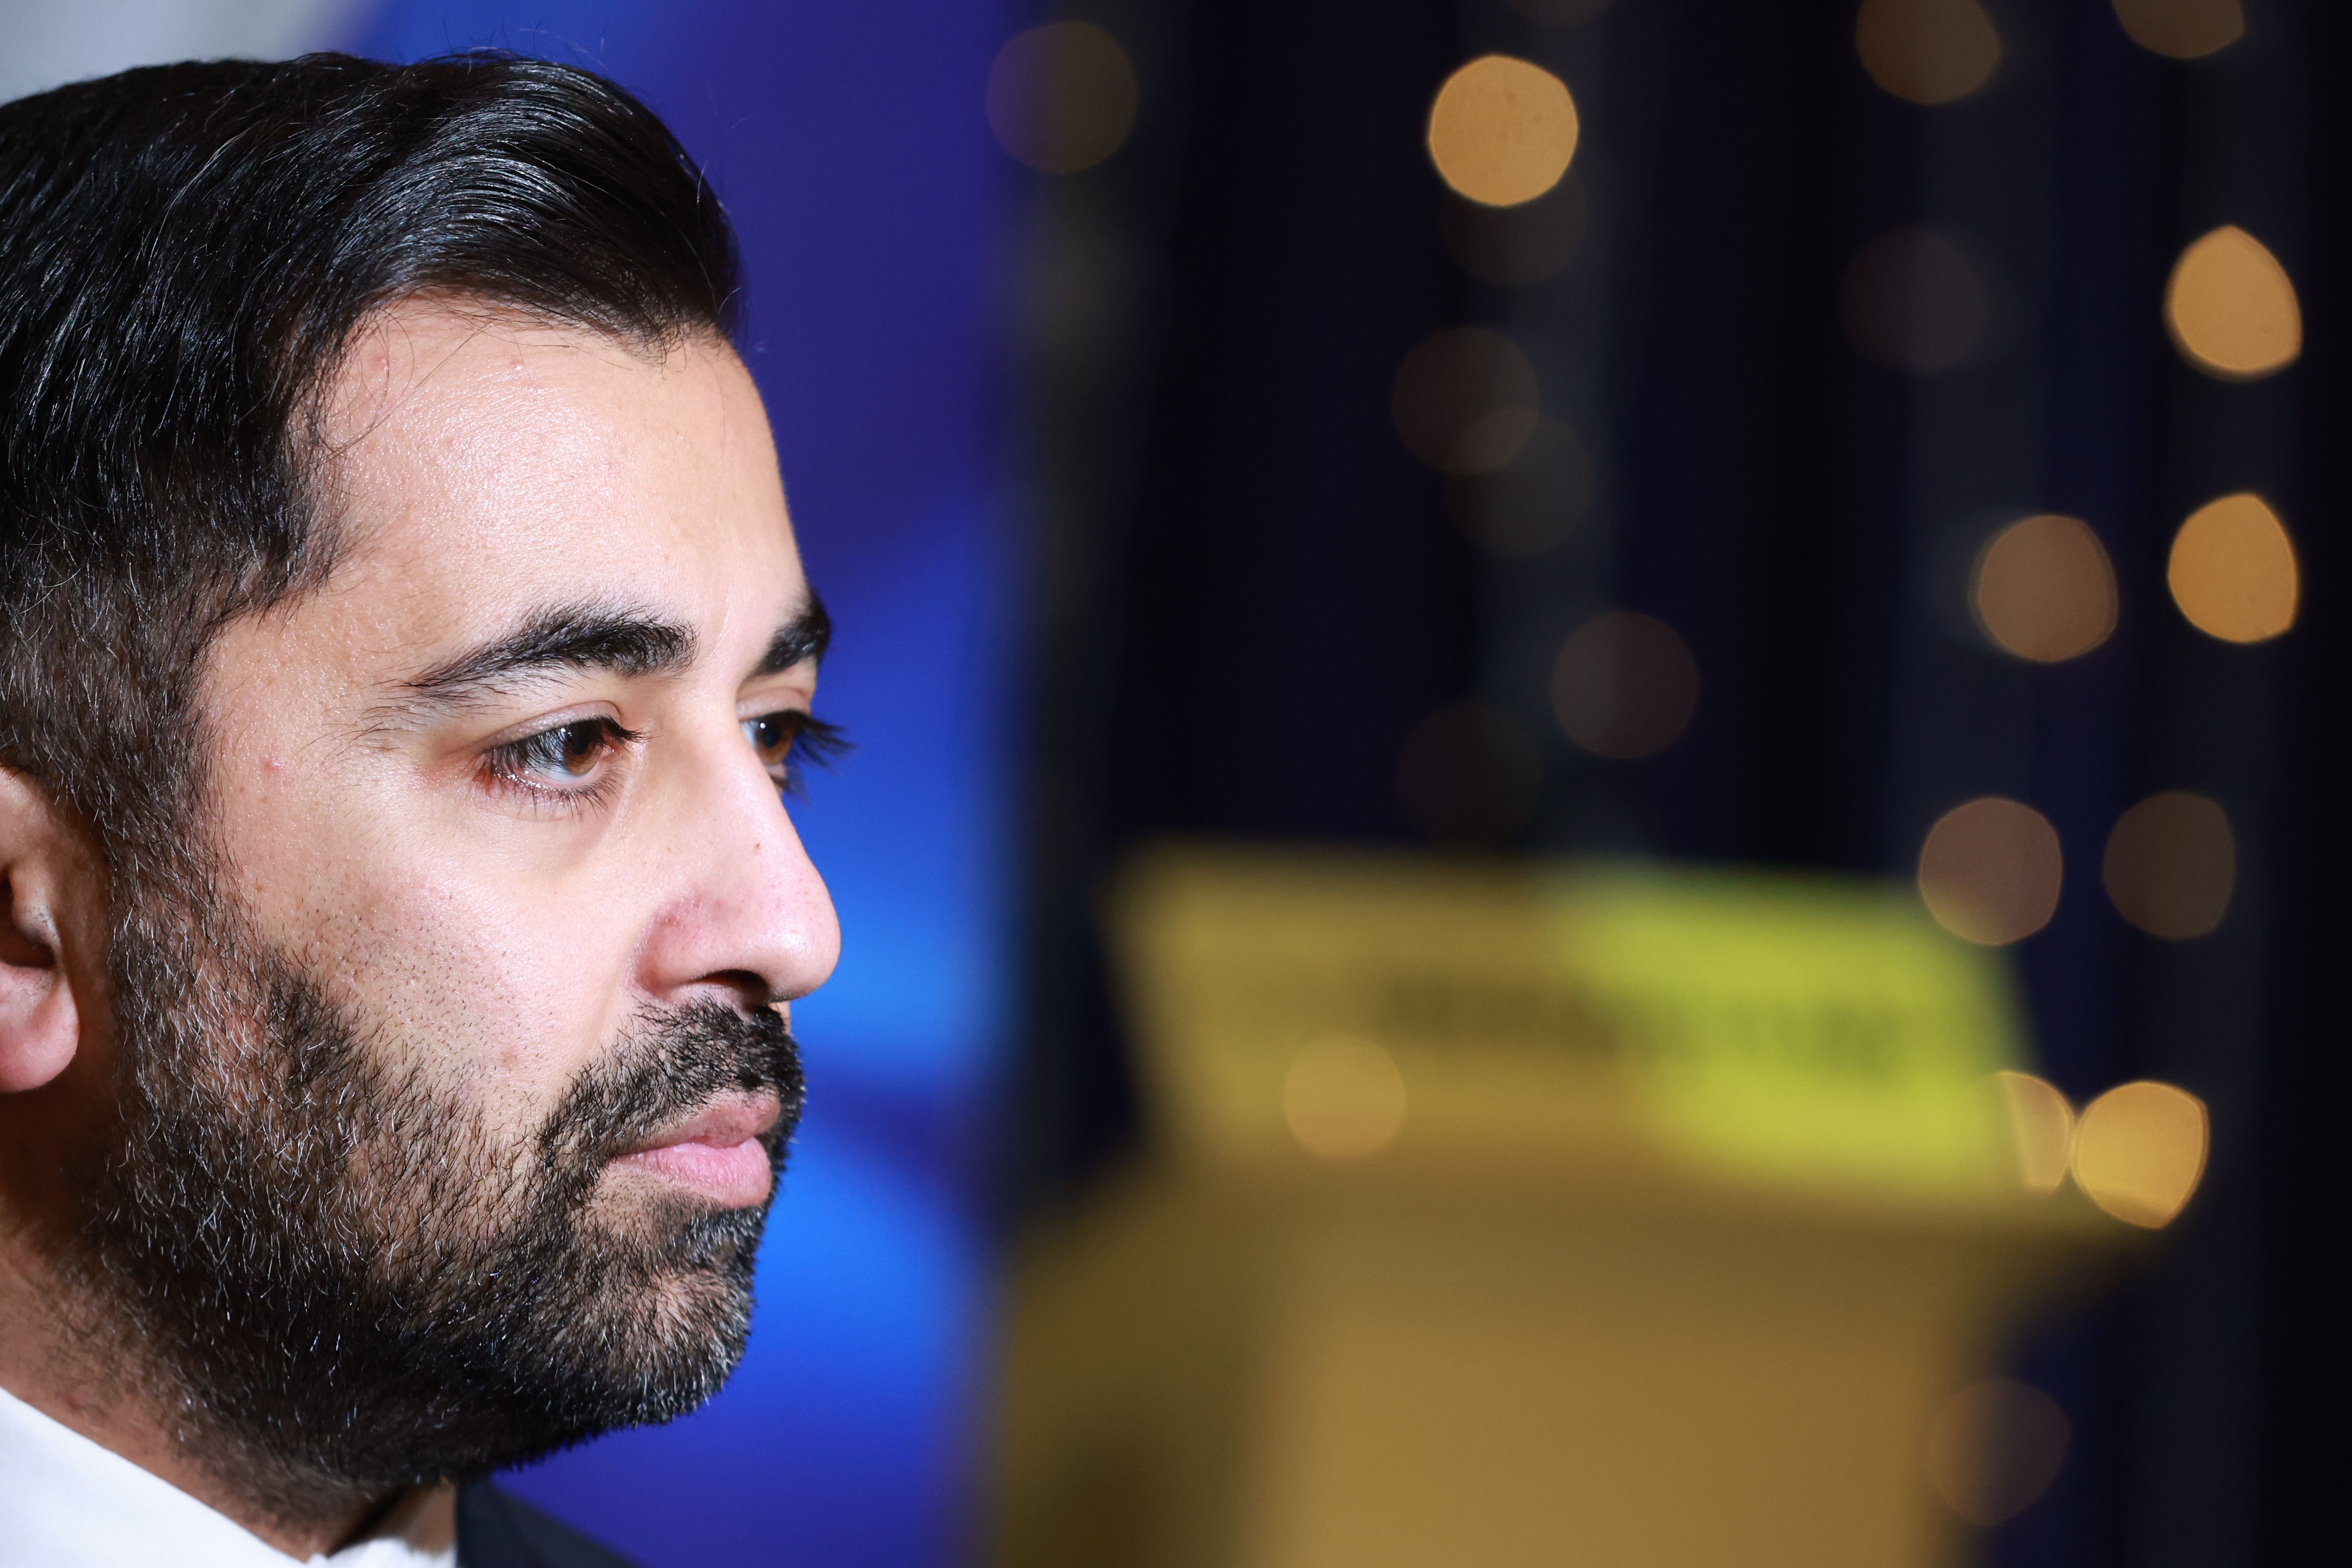 Scottish First Minister Humza Yousaf’s brother-in-law has been arrested